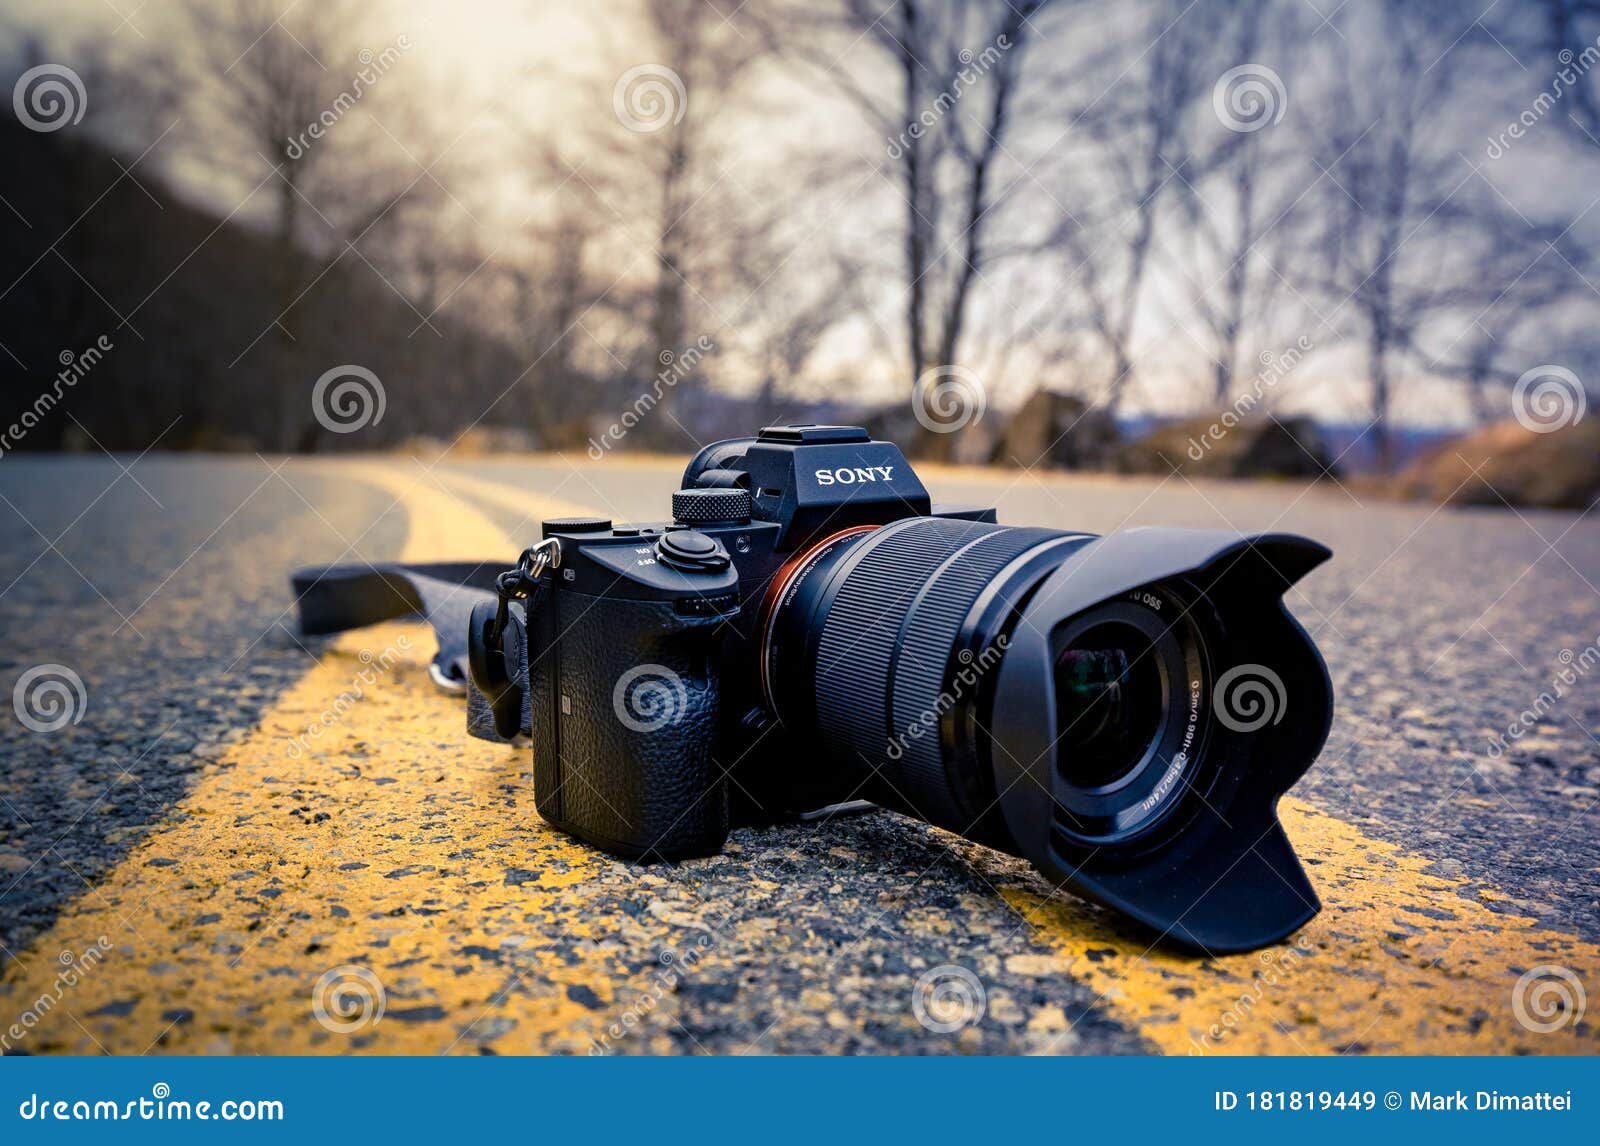 Sony Camera Sitting in the Middle of the Road Editorial Stock Image - Image  of negative, road: 181819449